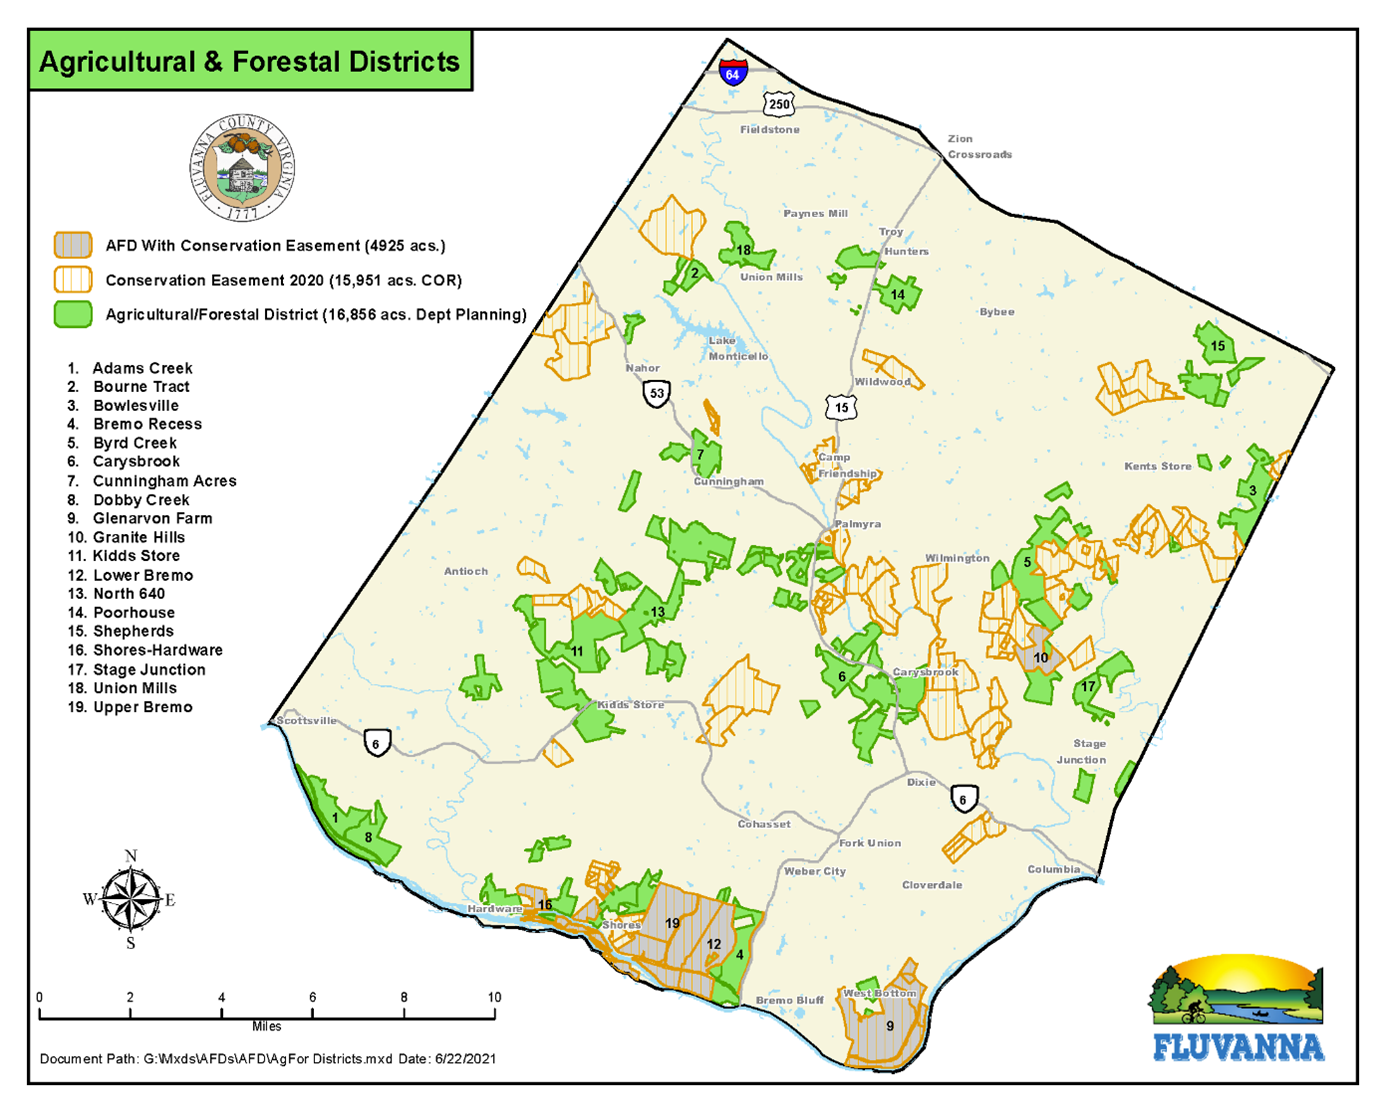 Preserving Fluvanna’s land and open space